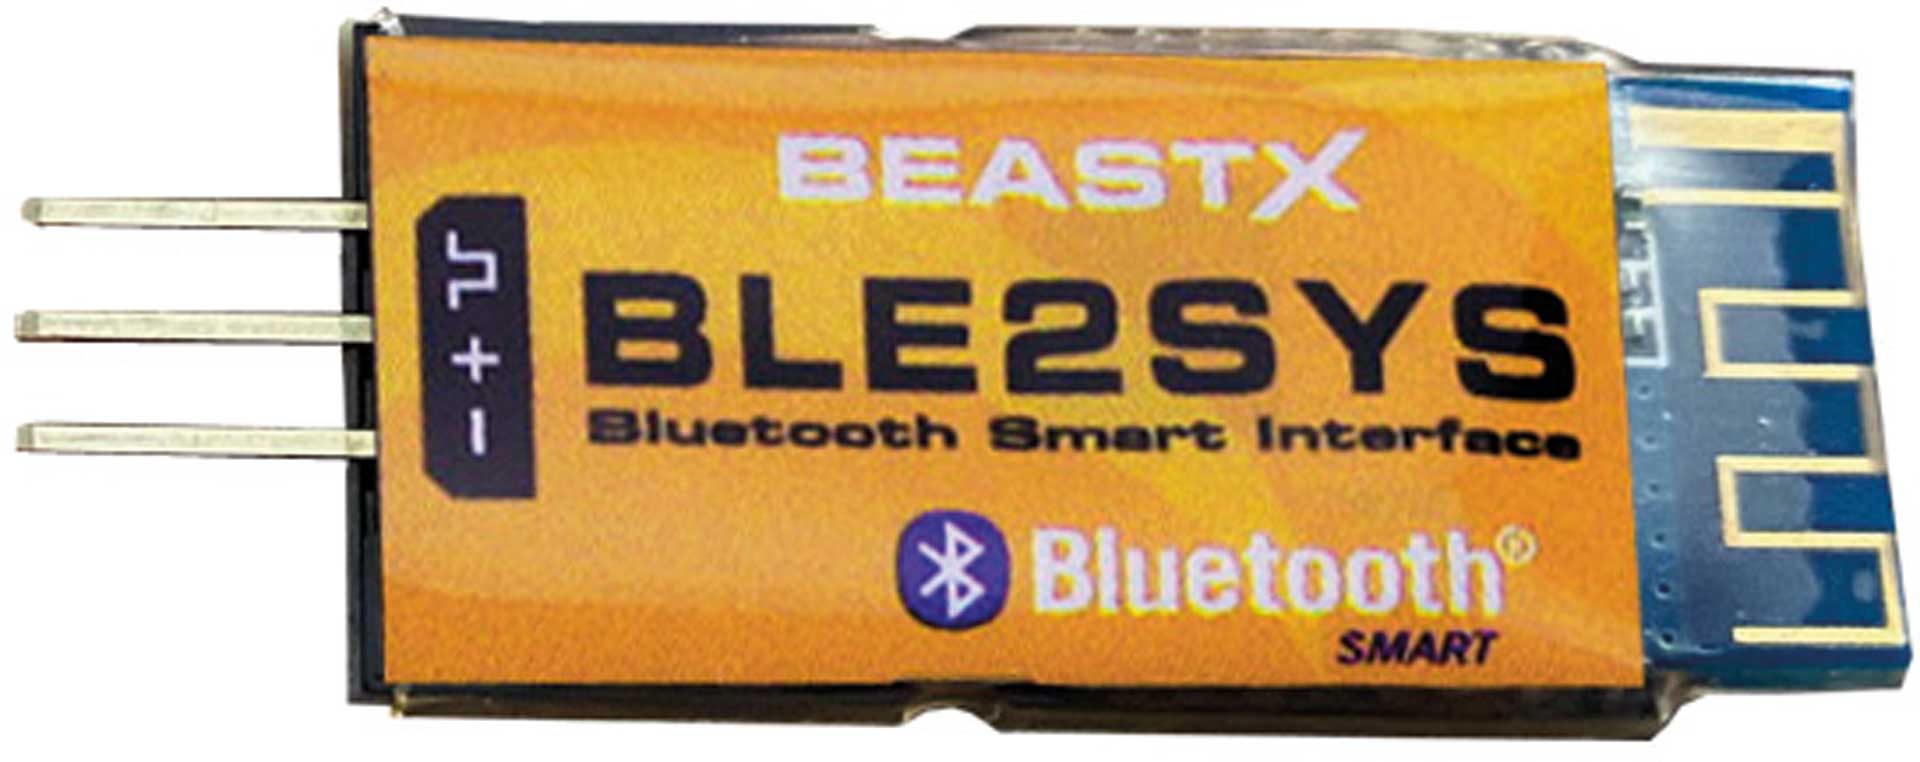 BEASTX BLE2SYS Bluetooth Smart Interface (BLE v5)